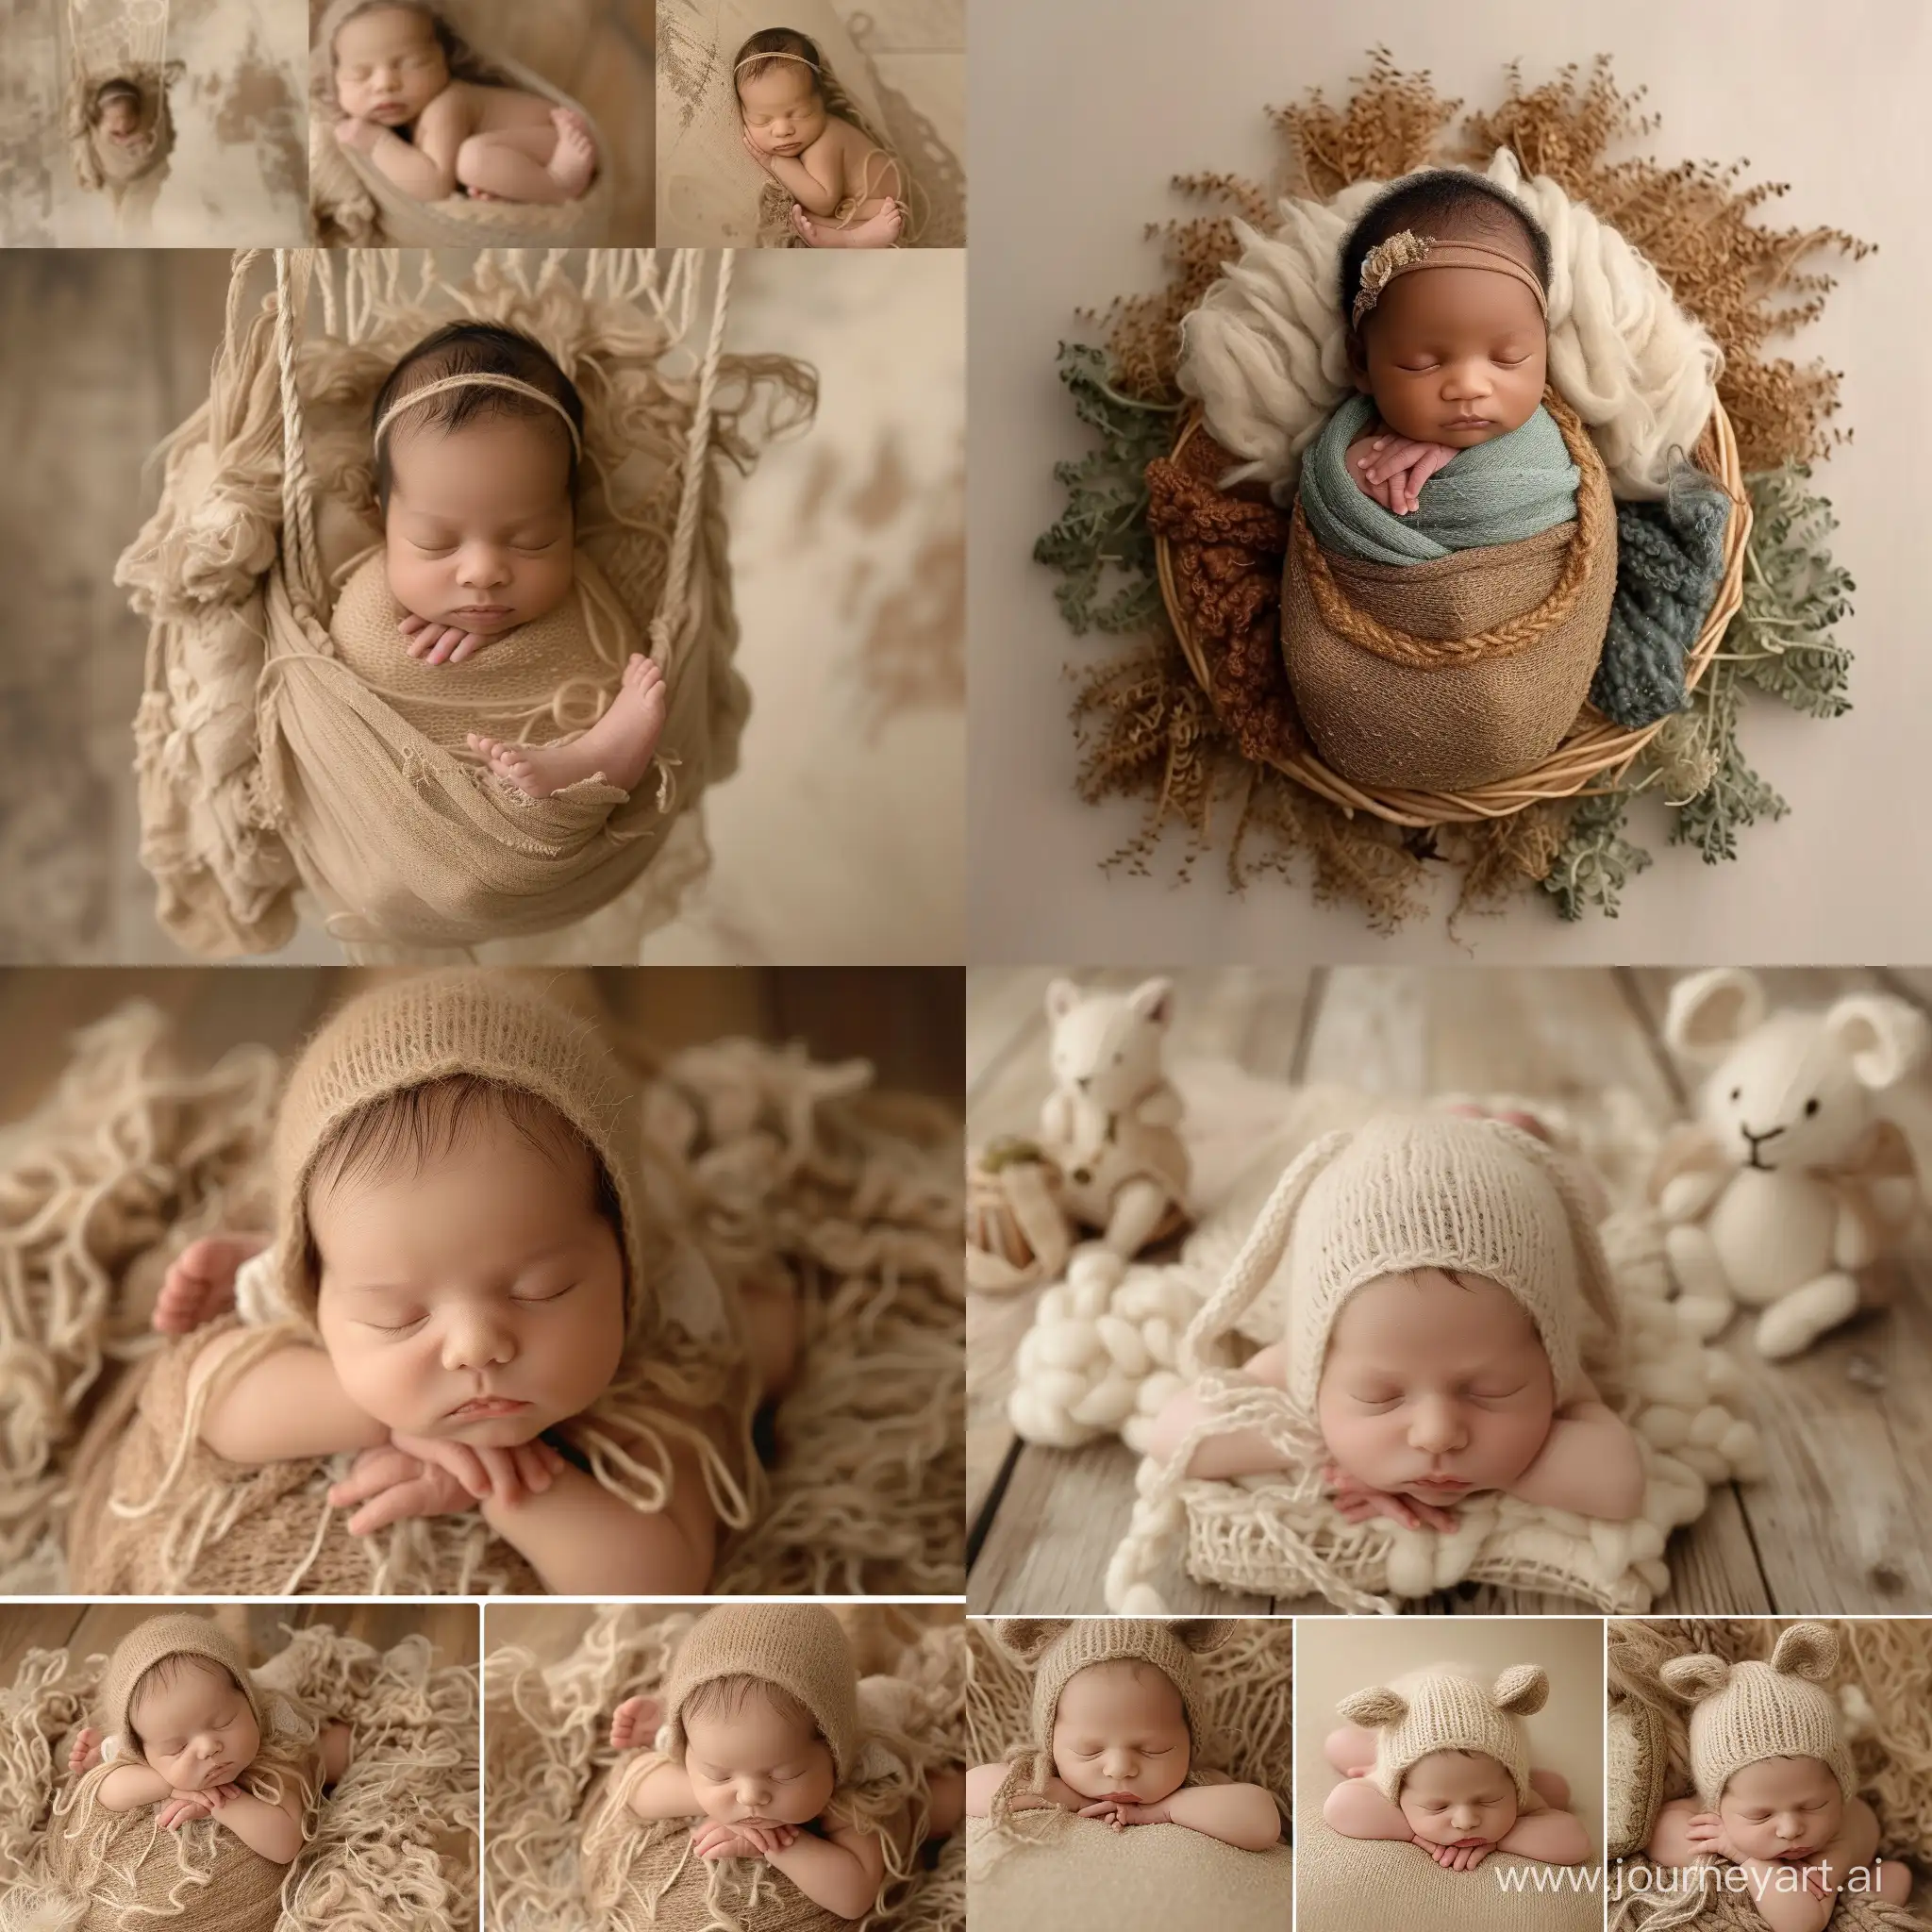 Adorable-Newborn-Photography-Session-Sweet-Moments-Captured-in-Creative-Advertisements